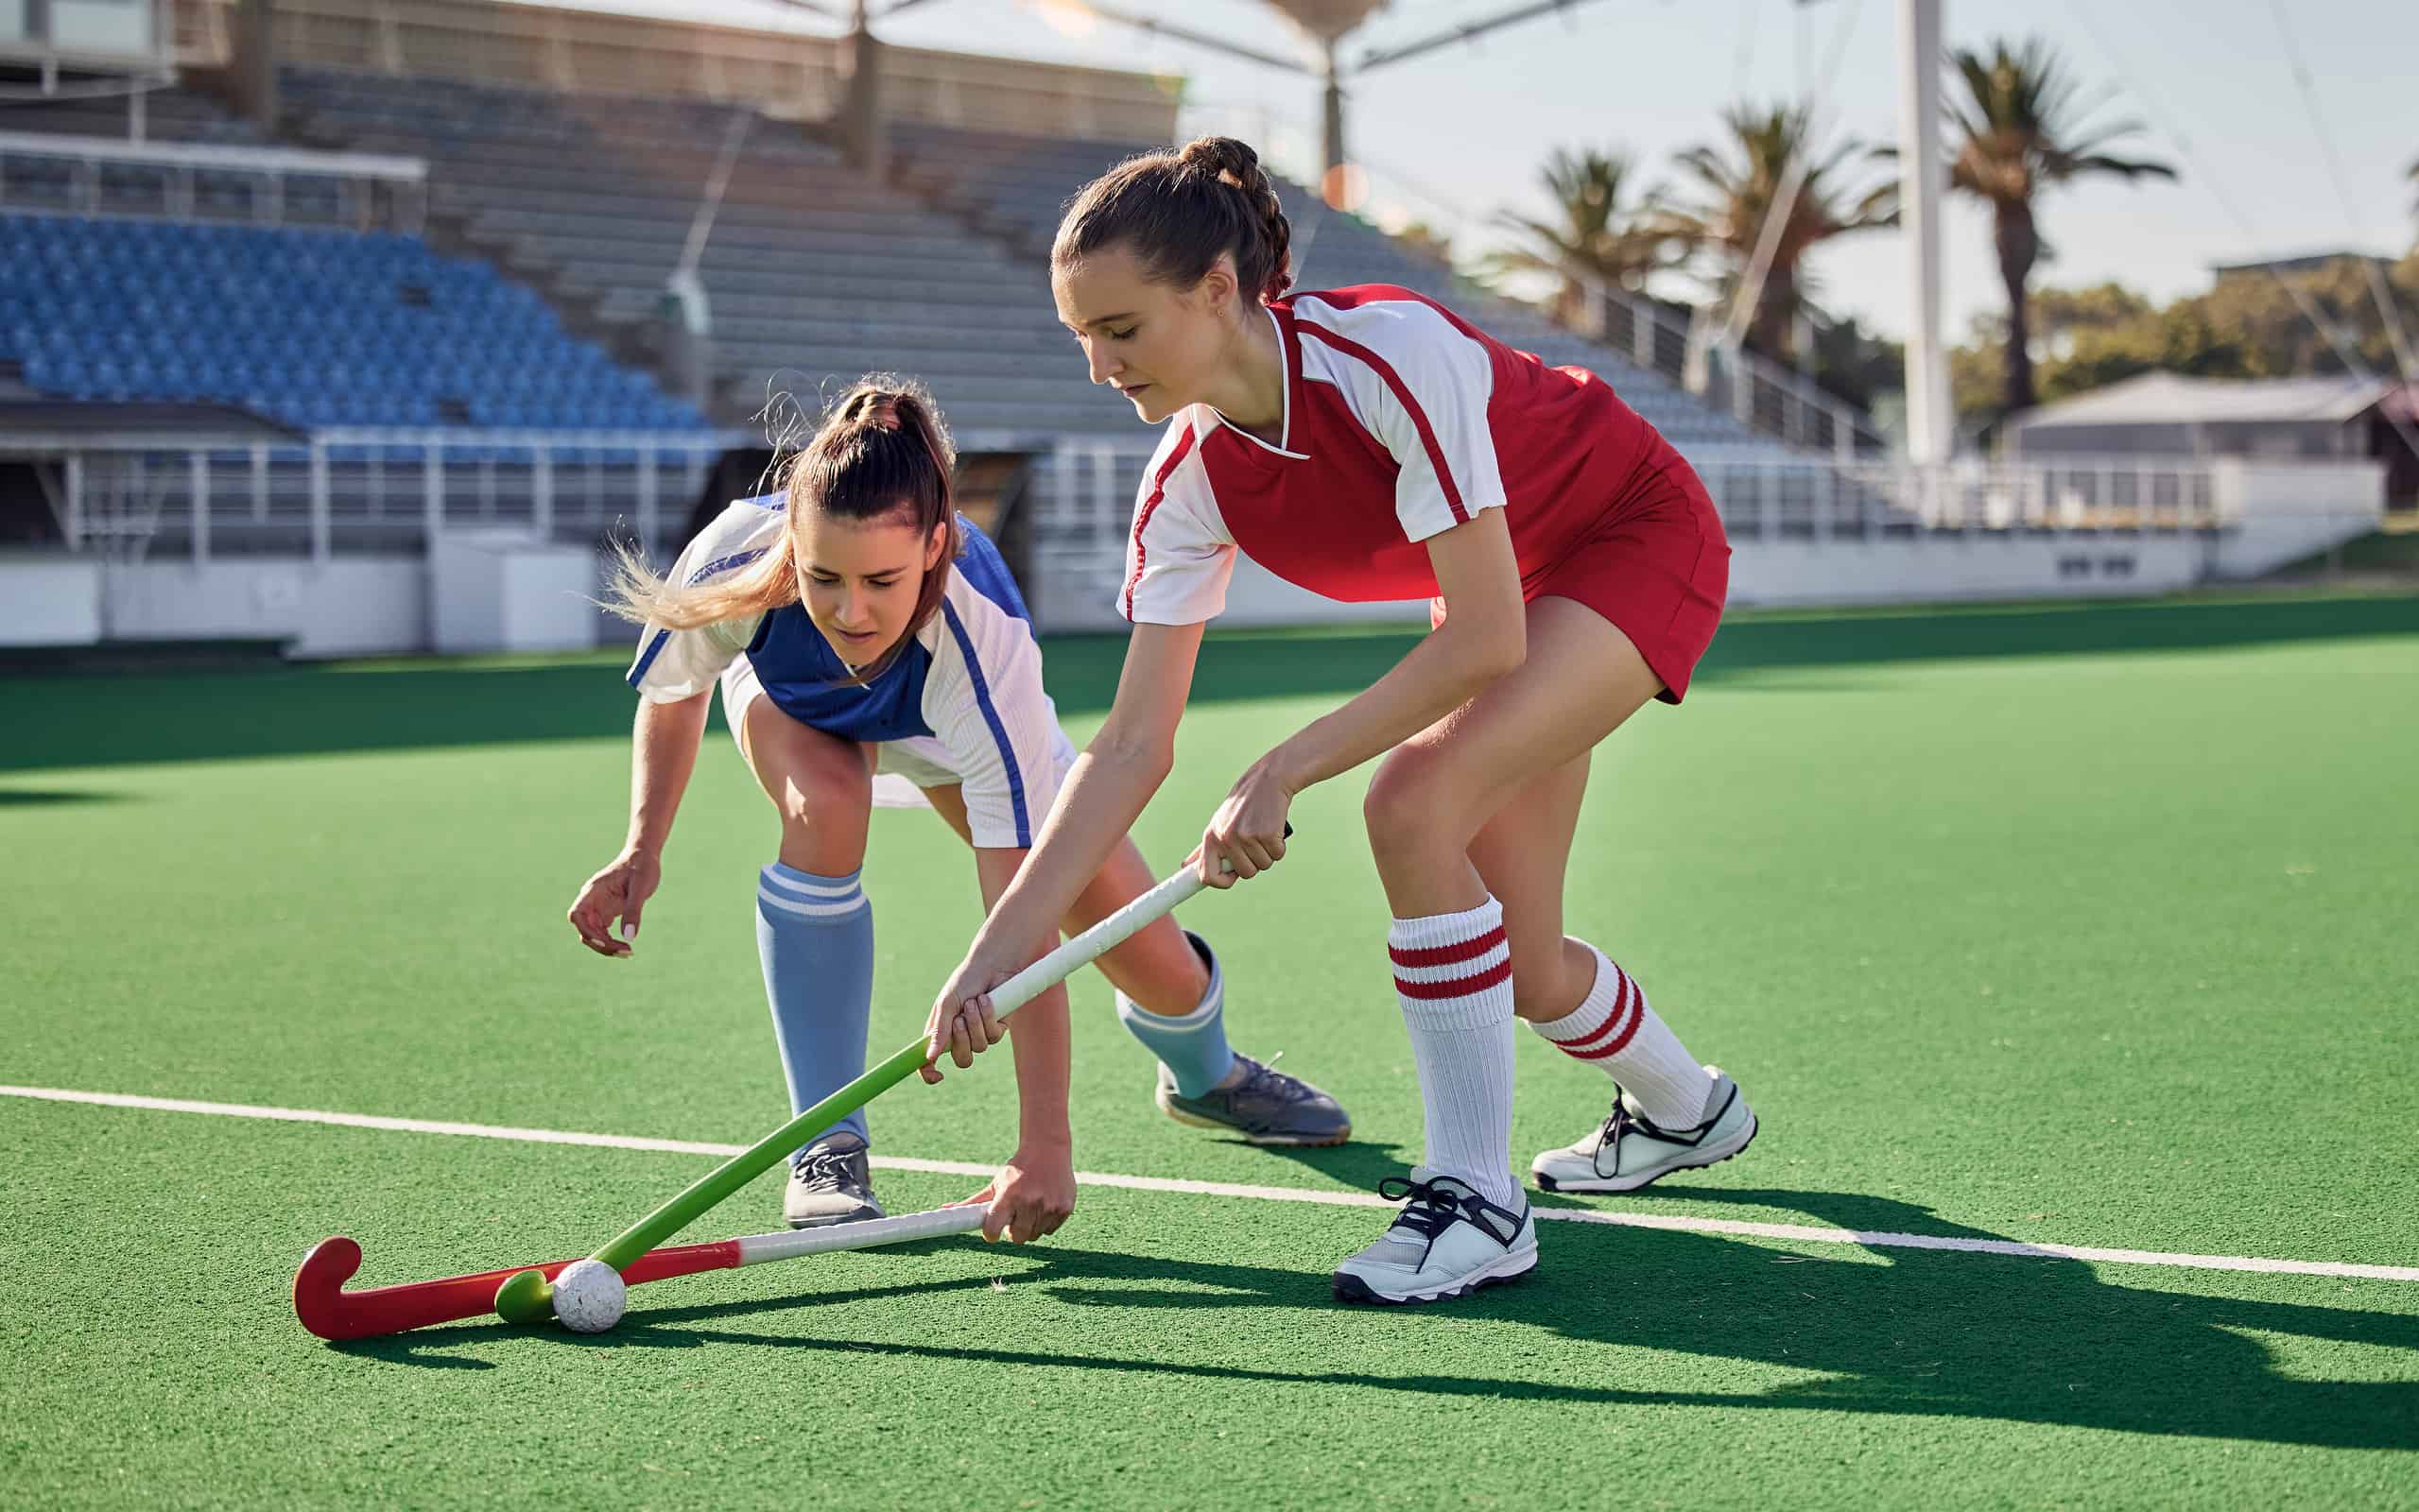 Two competitors battling over the ball during a field hockey game.